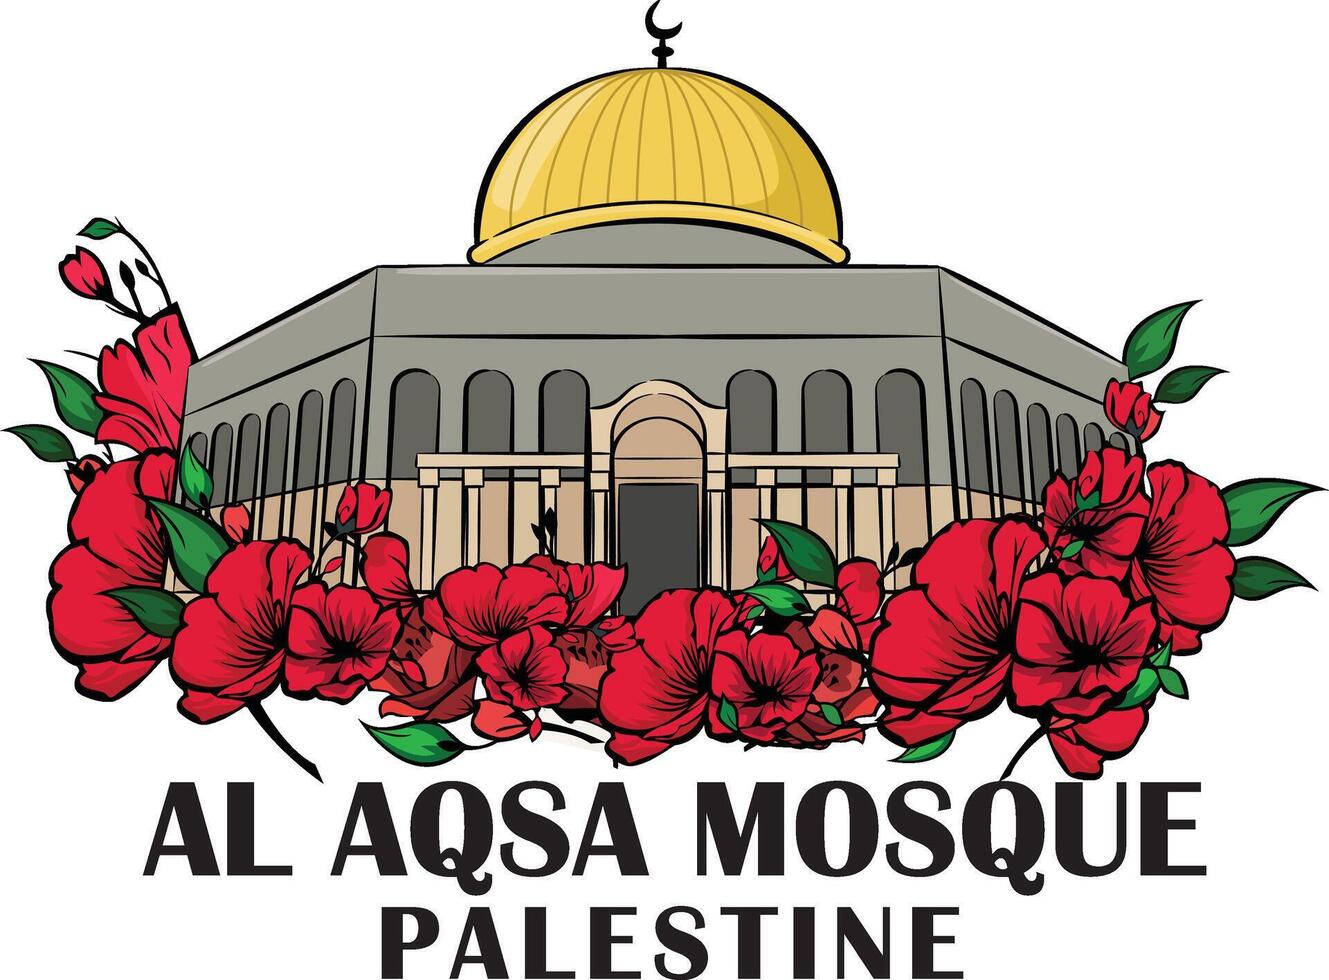 AL aqsa mosque palestine with flowers vector